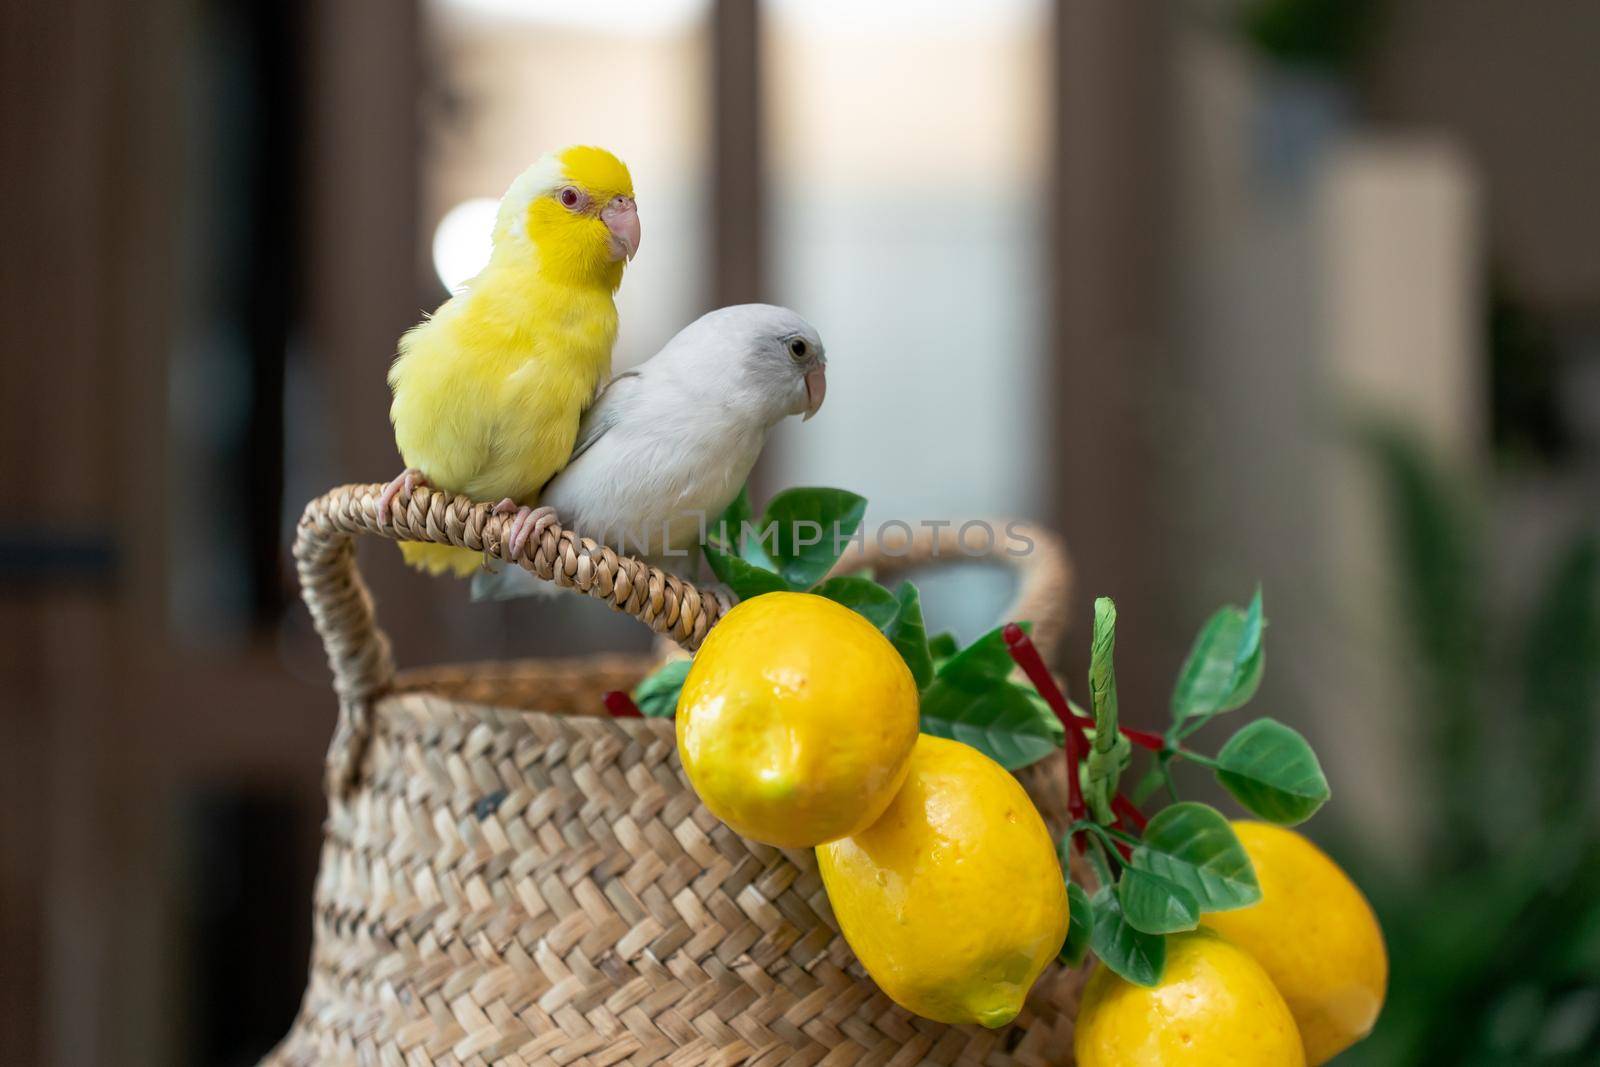 Couple Forpus little tiny Parrots bird is perched on the wicker basket and artificial lemon. by sirawit99